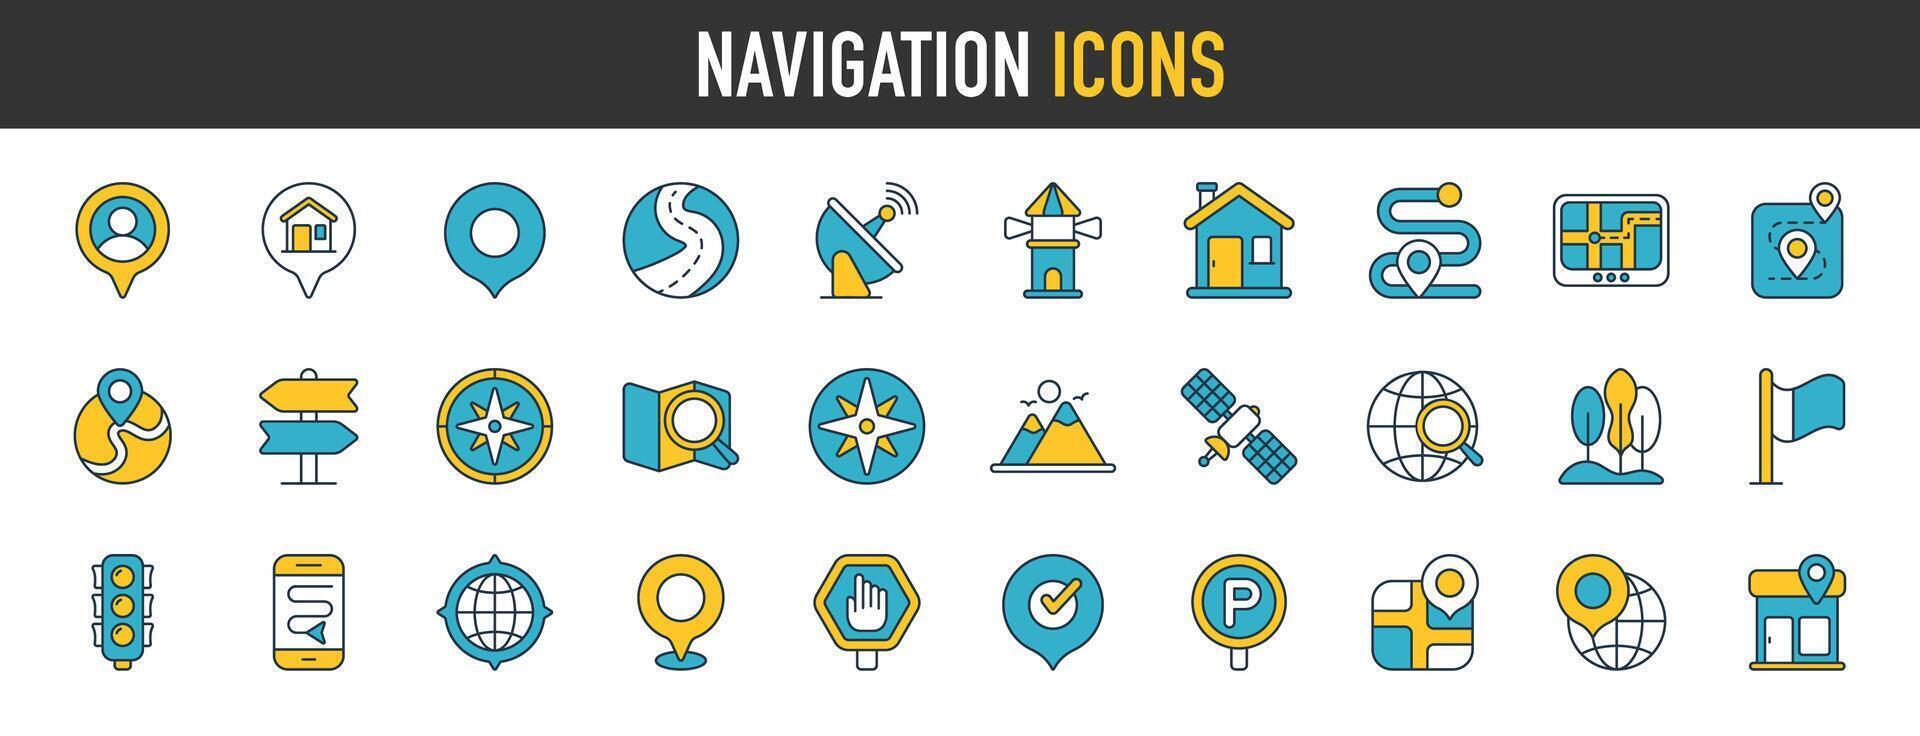 Navigation icon set. Containing map, map pin, gps, destination, directions, distance, place, setellite, navigation and address icons. Location icons vector collection.